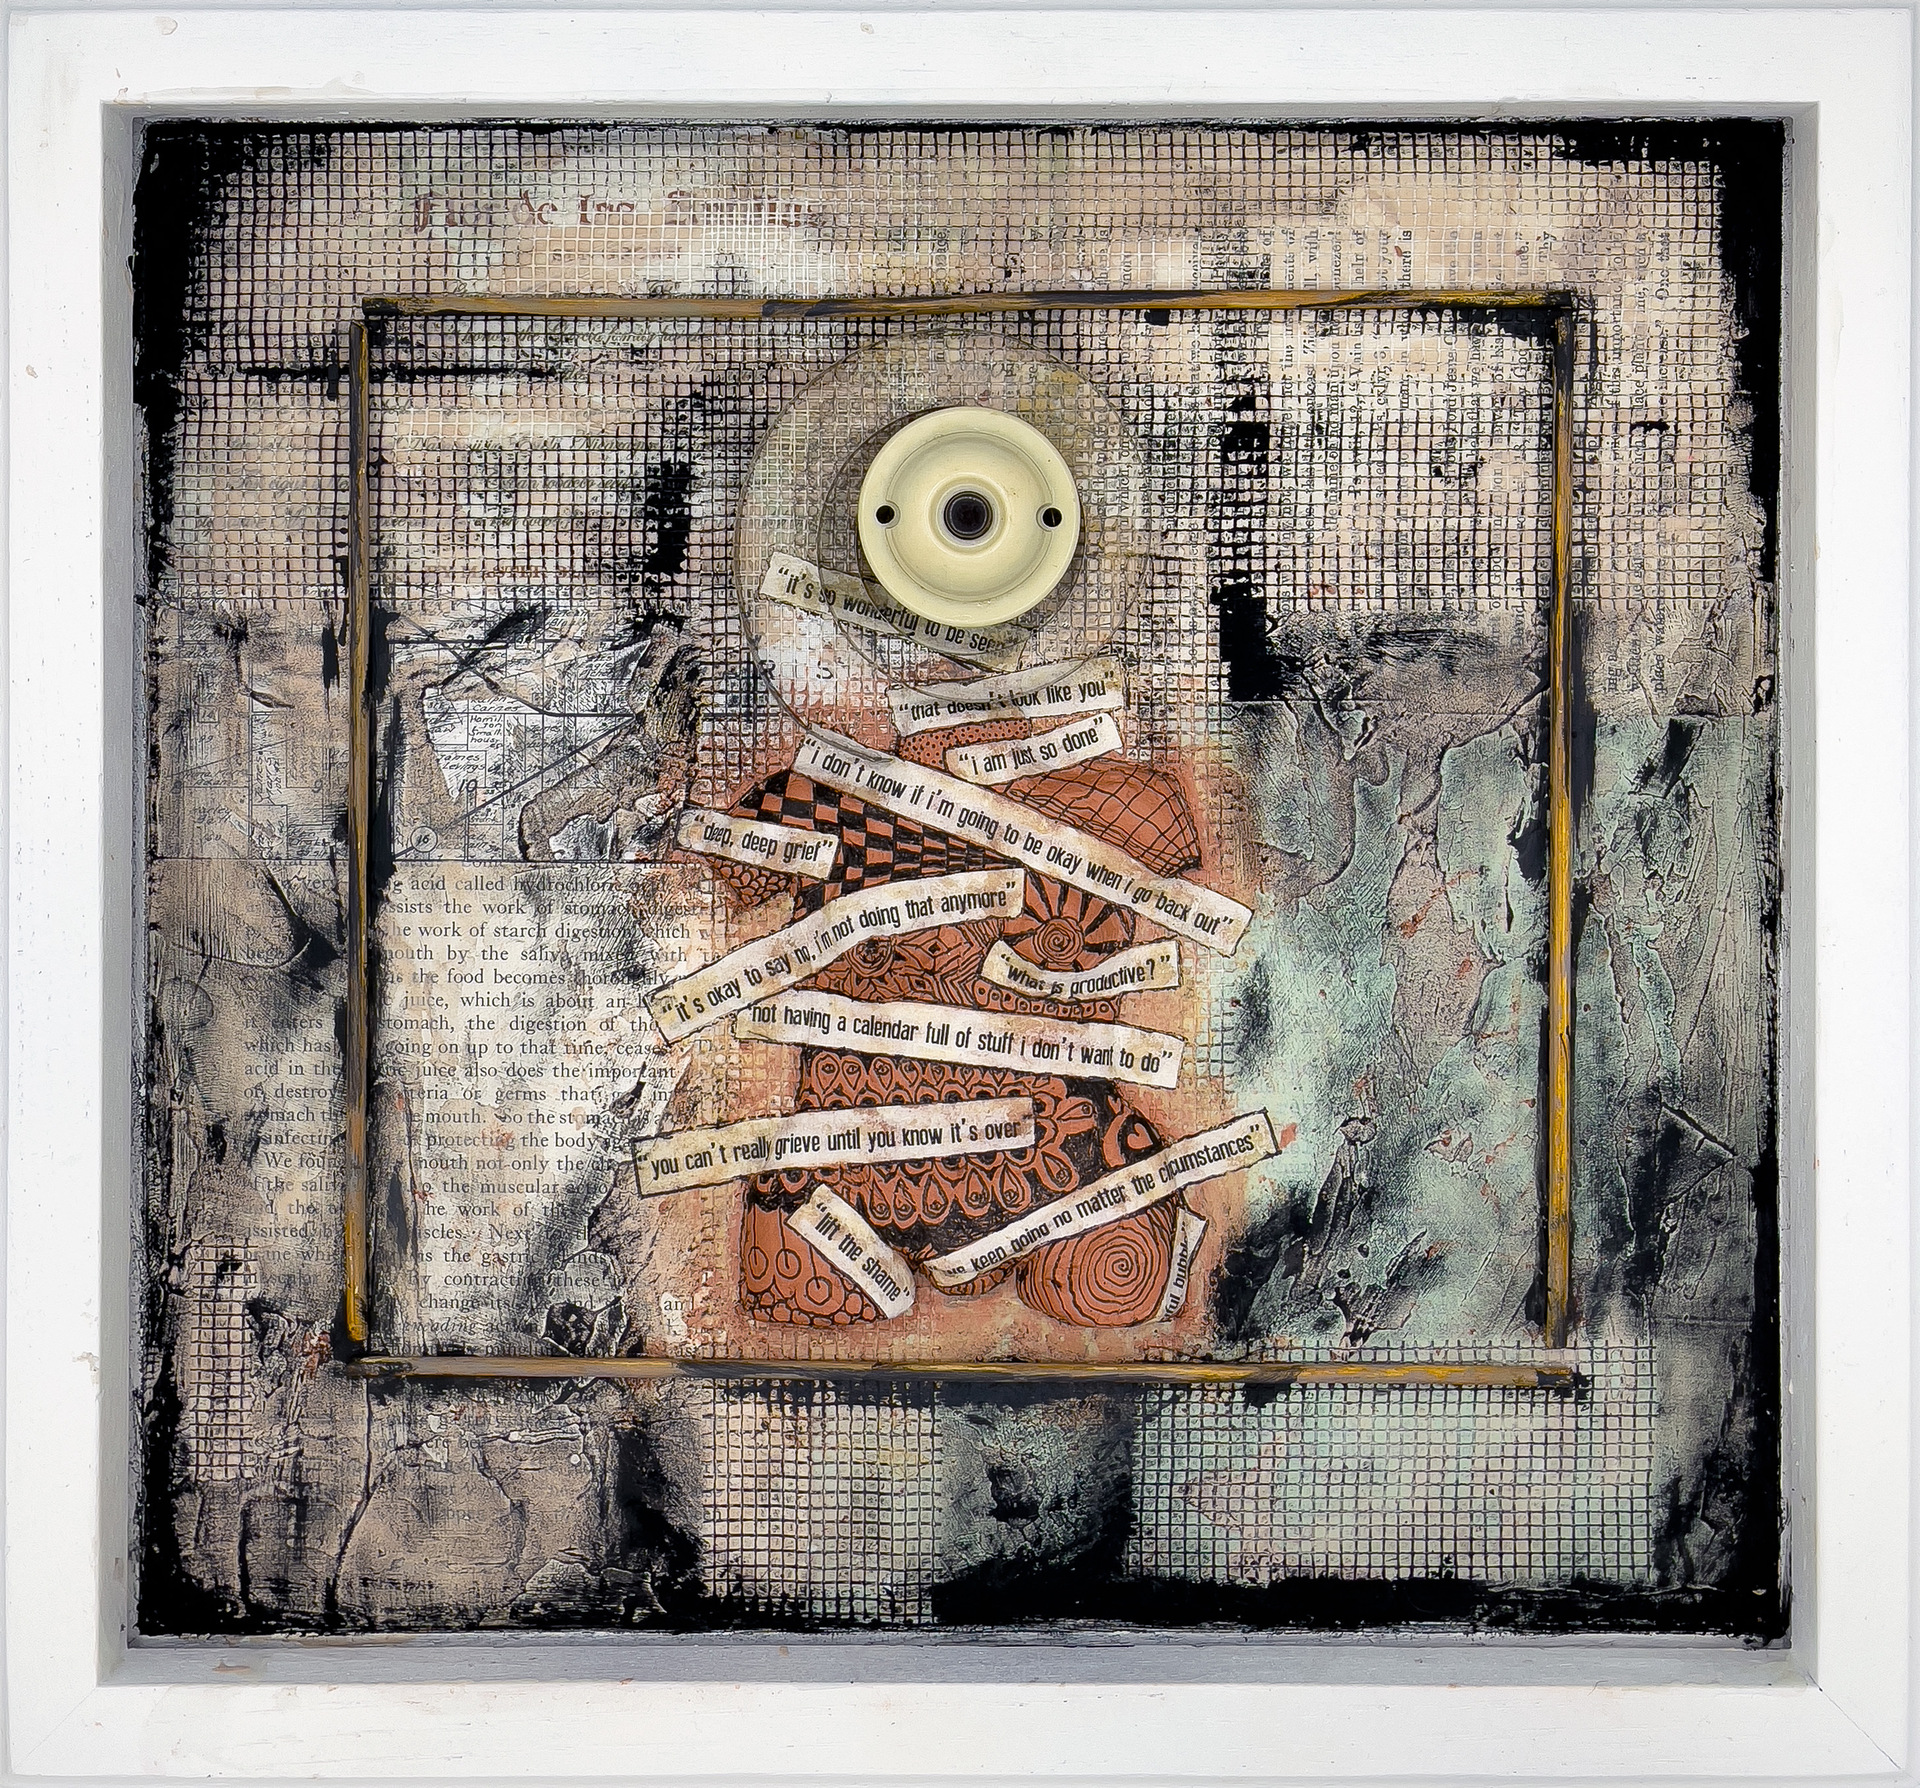 Monica Marks mixed media collage that projects our lives post pandemic. The work features a doorbell and strips of paper with text depicting how we will handle the new normal. One piece says 